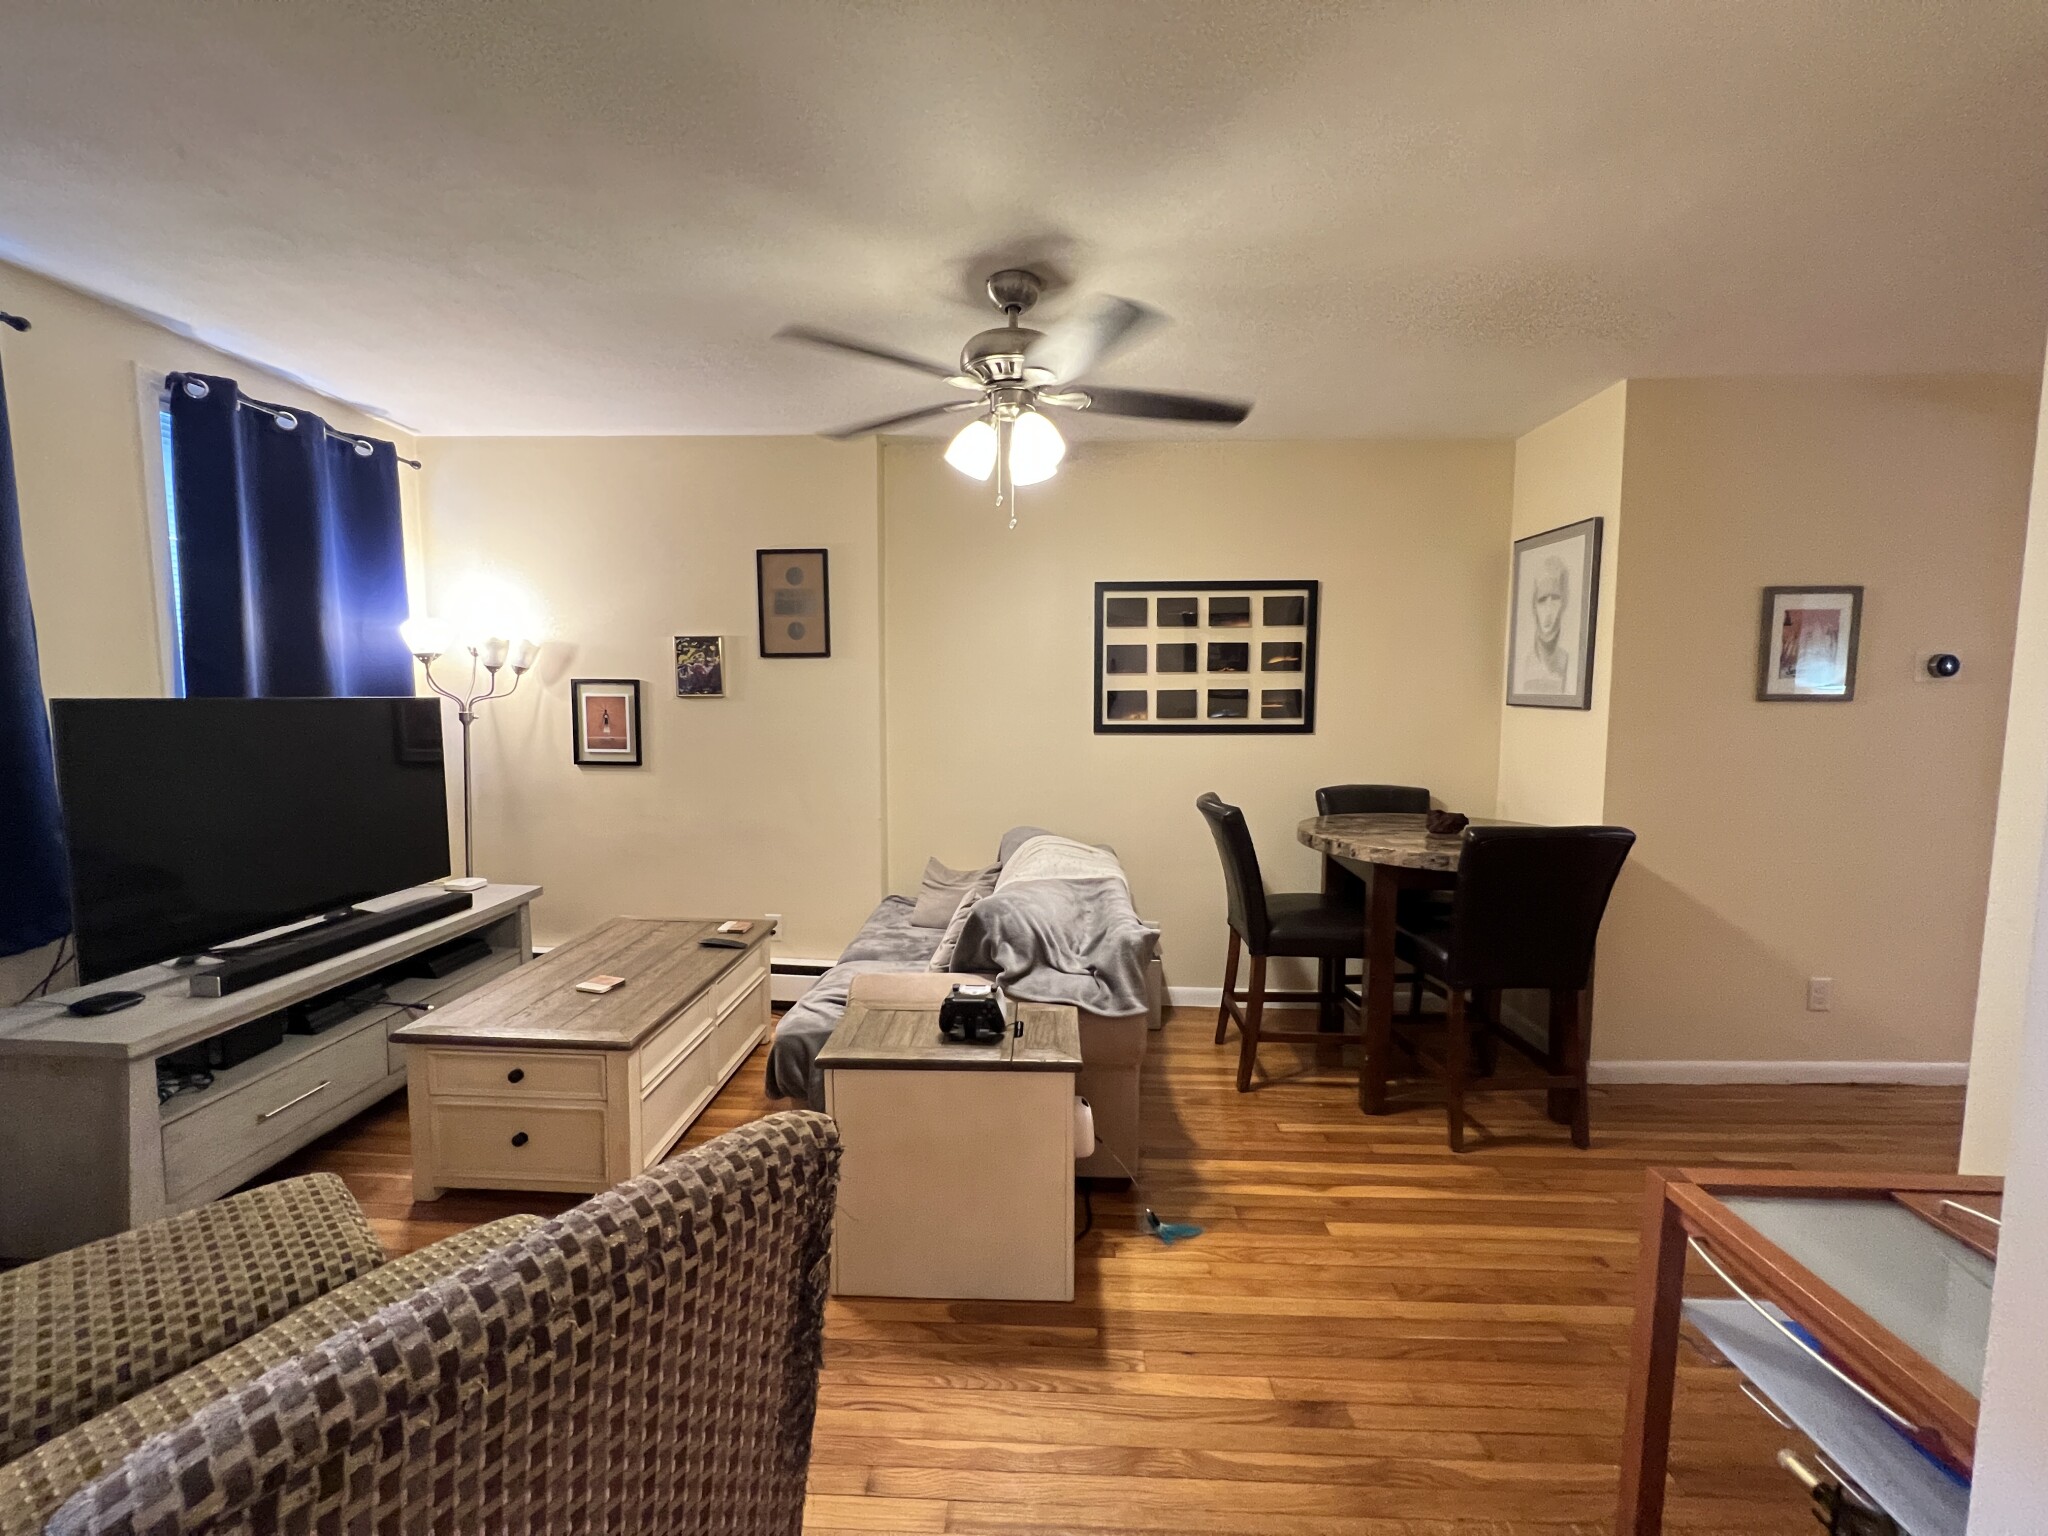 Photos of apartment on Great River Rd.,Somerville MA 02145